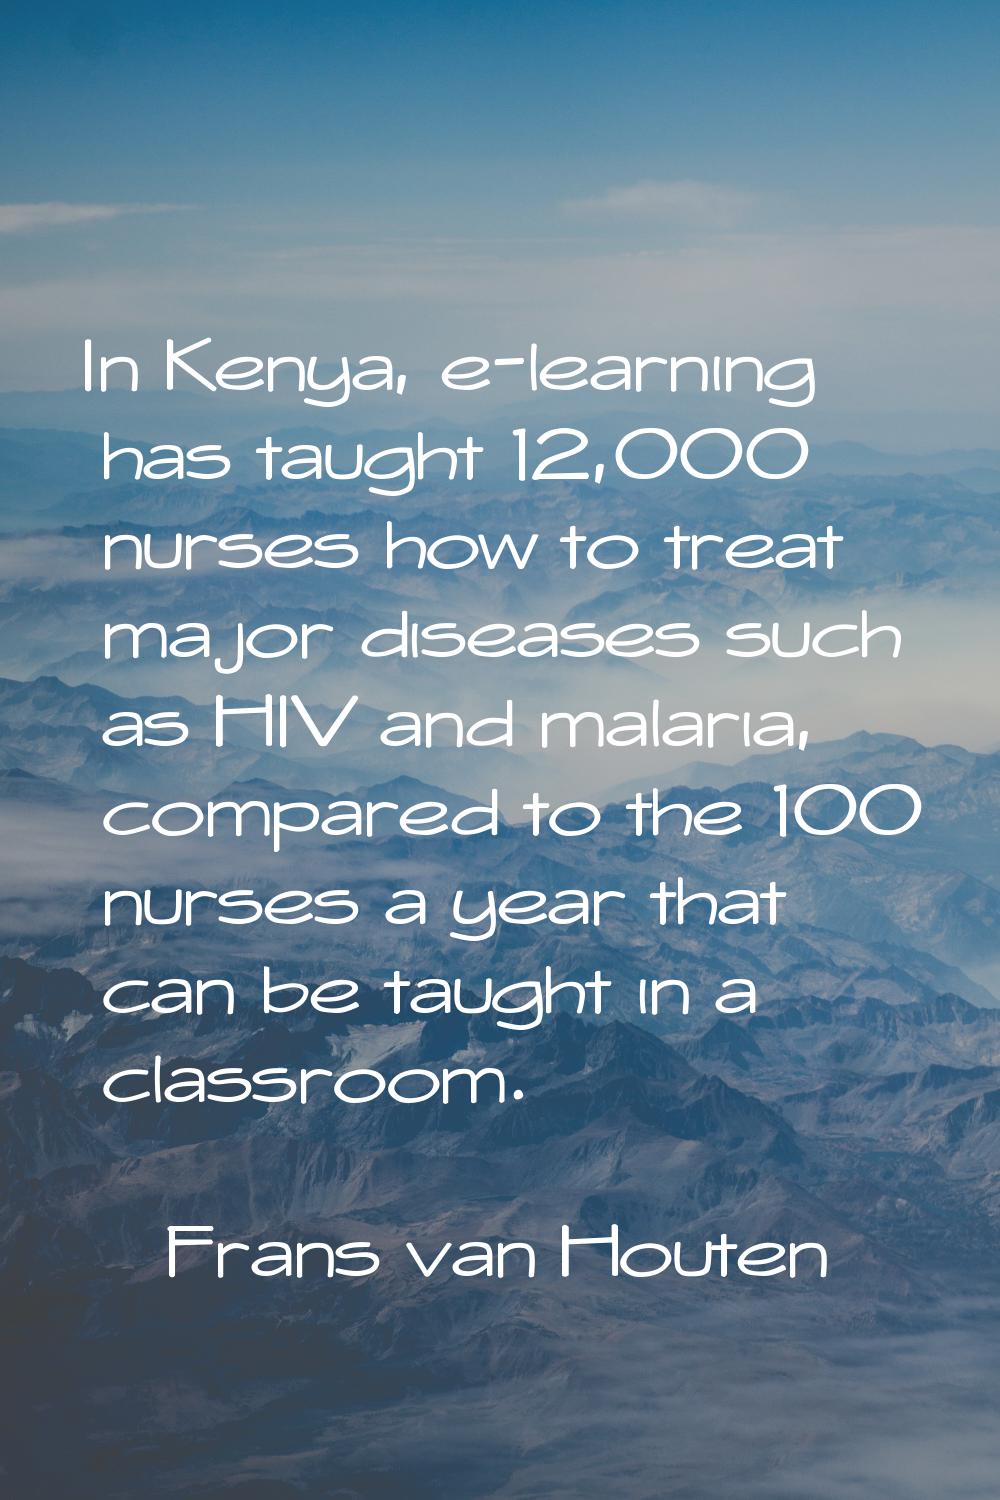 In Kenya, e-learning has taught 12,000 nurses how to treat major diseases such as HIV and malaria, 